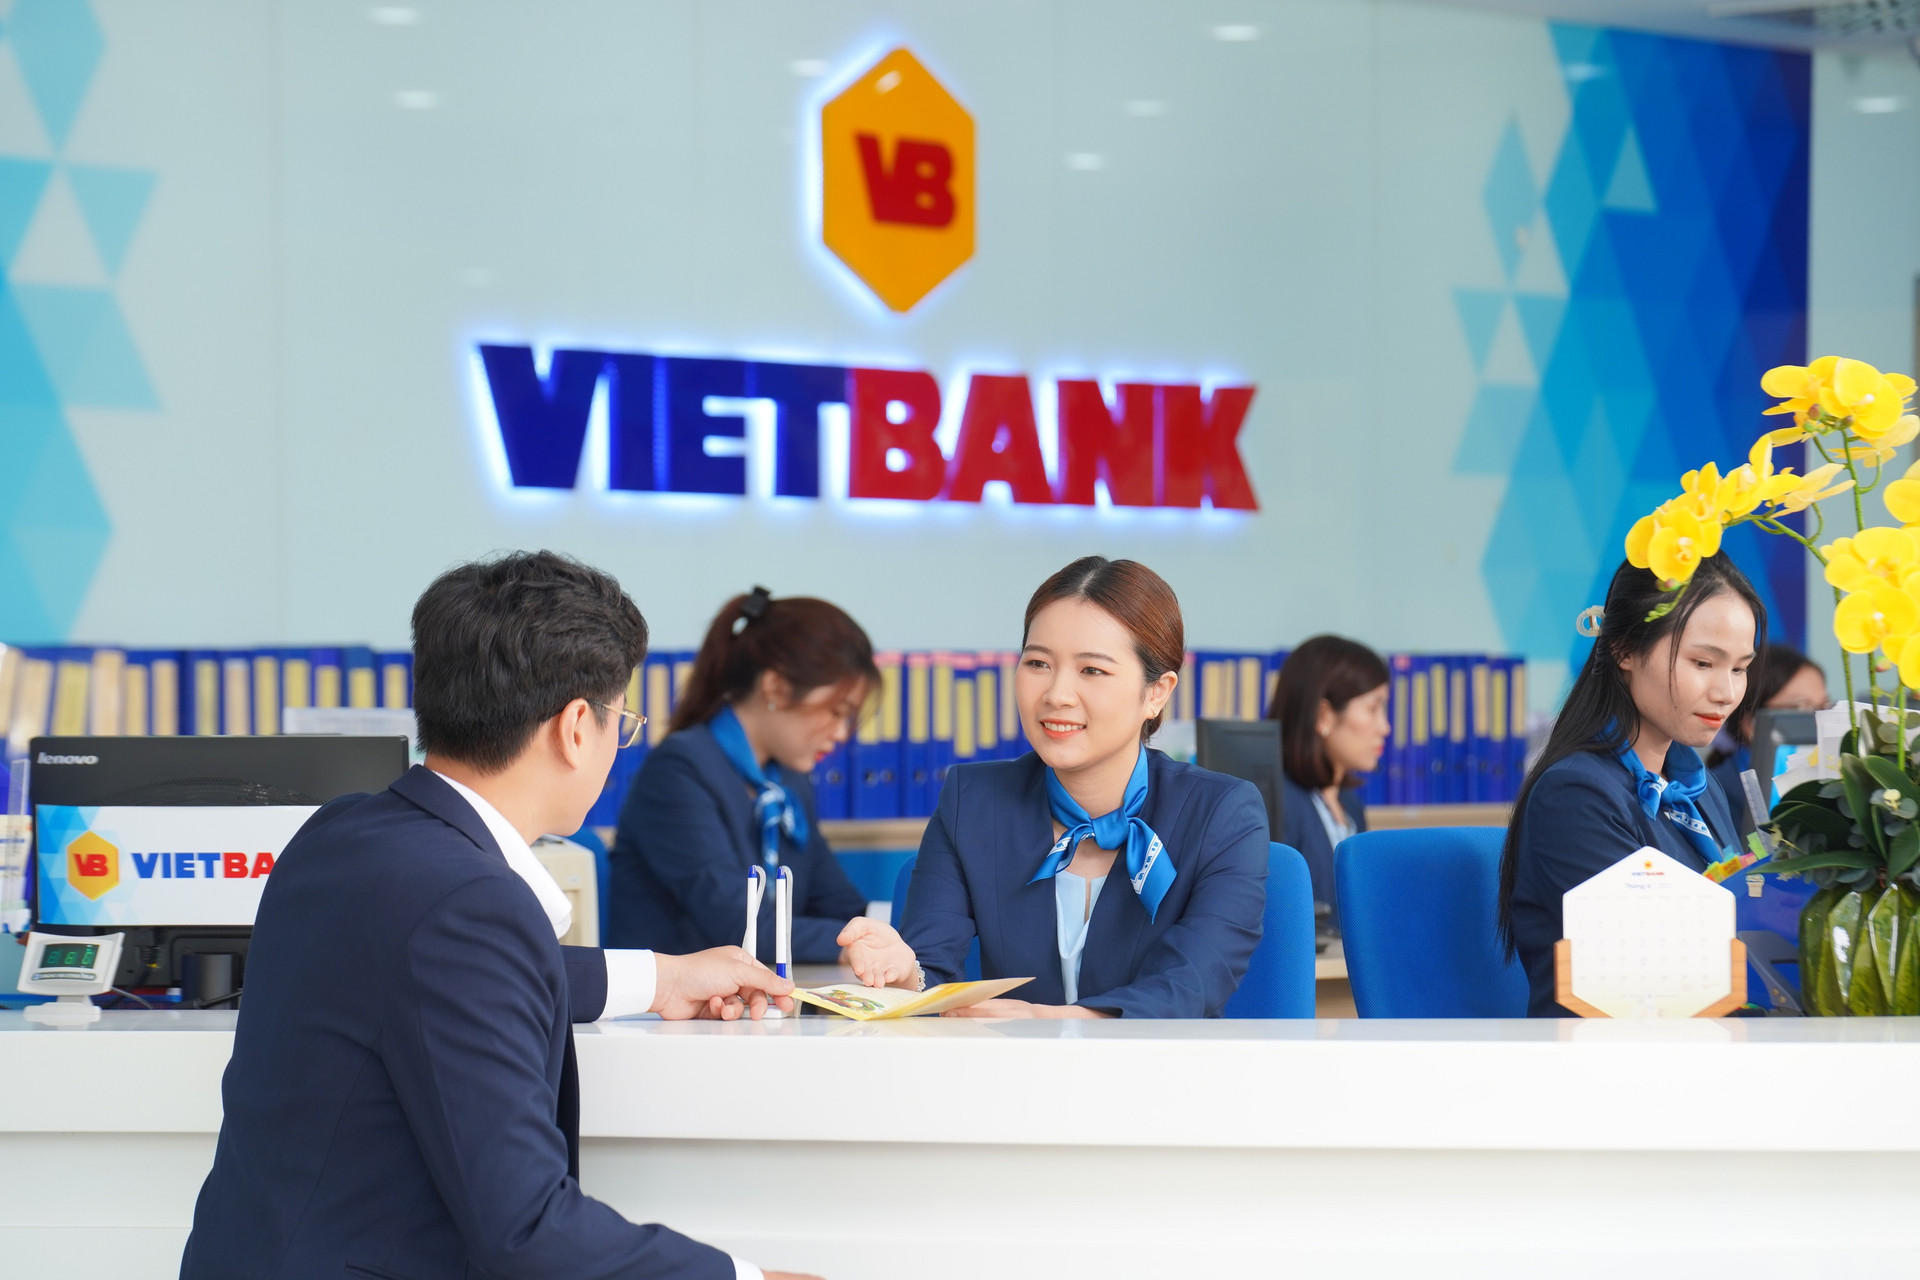 2-vietbank-canh-giao-dich.jpg